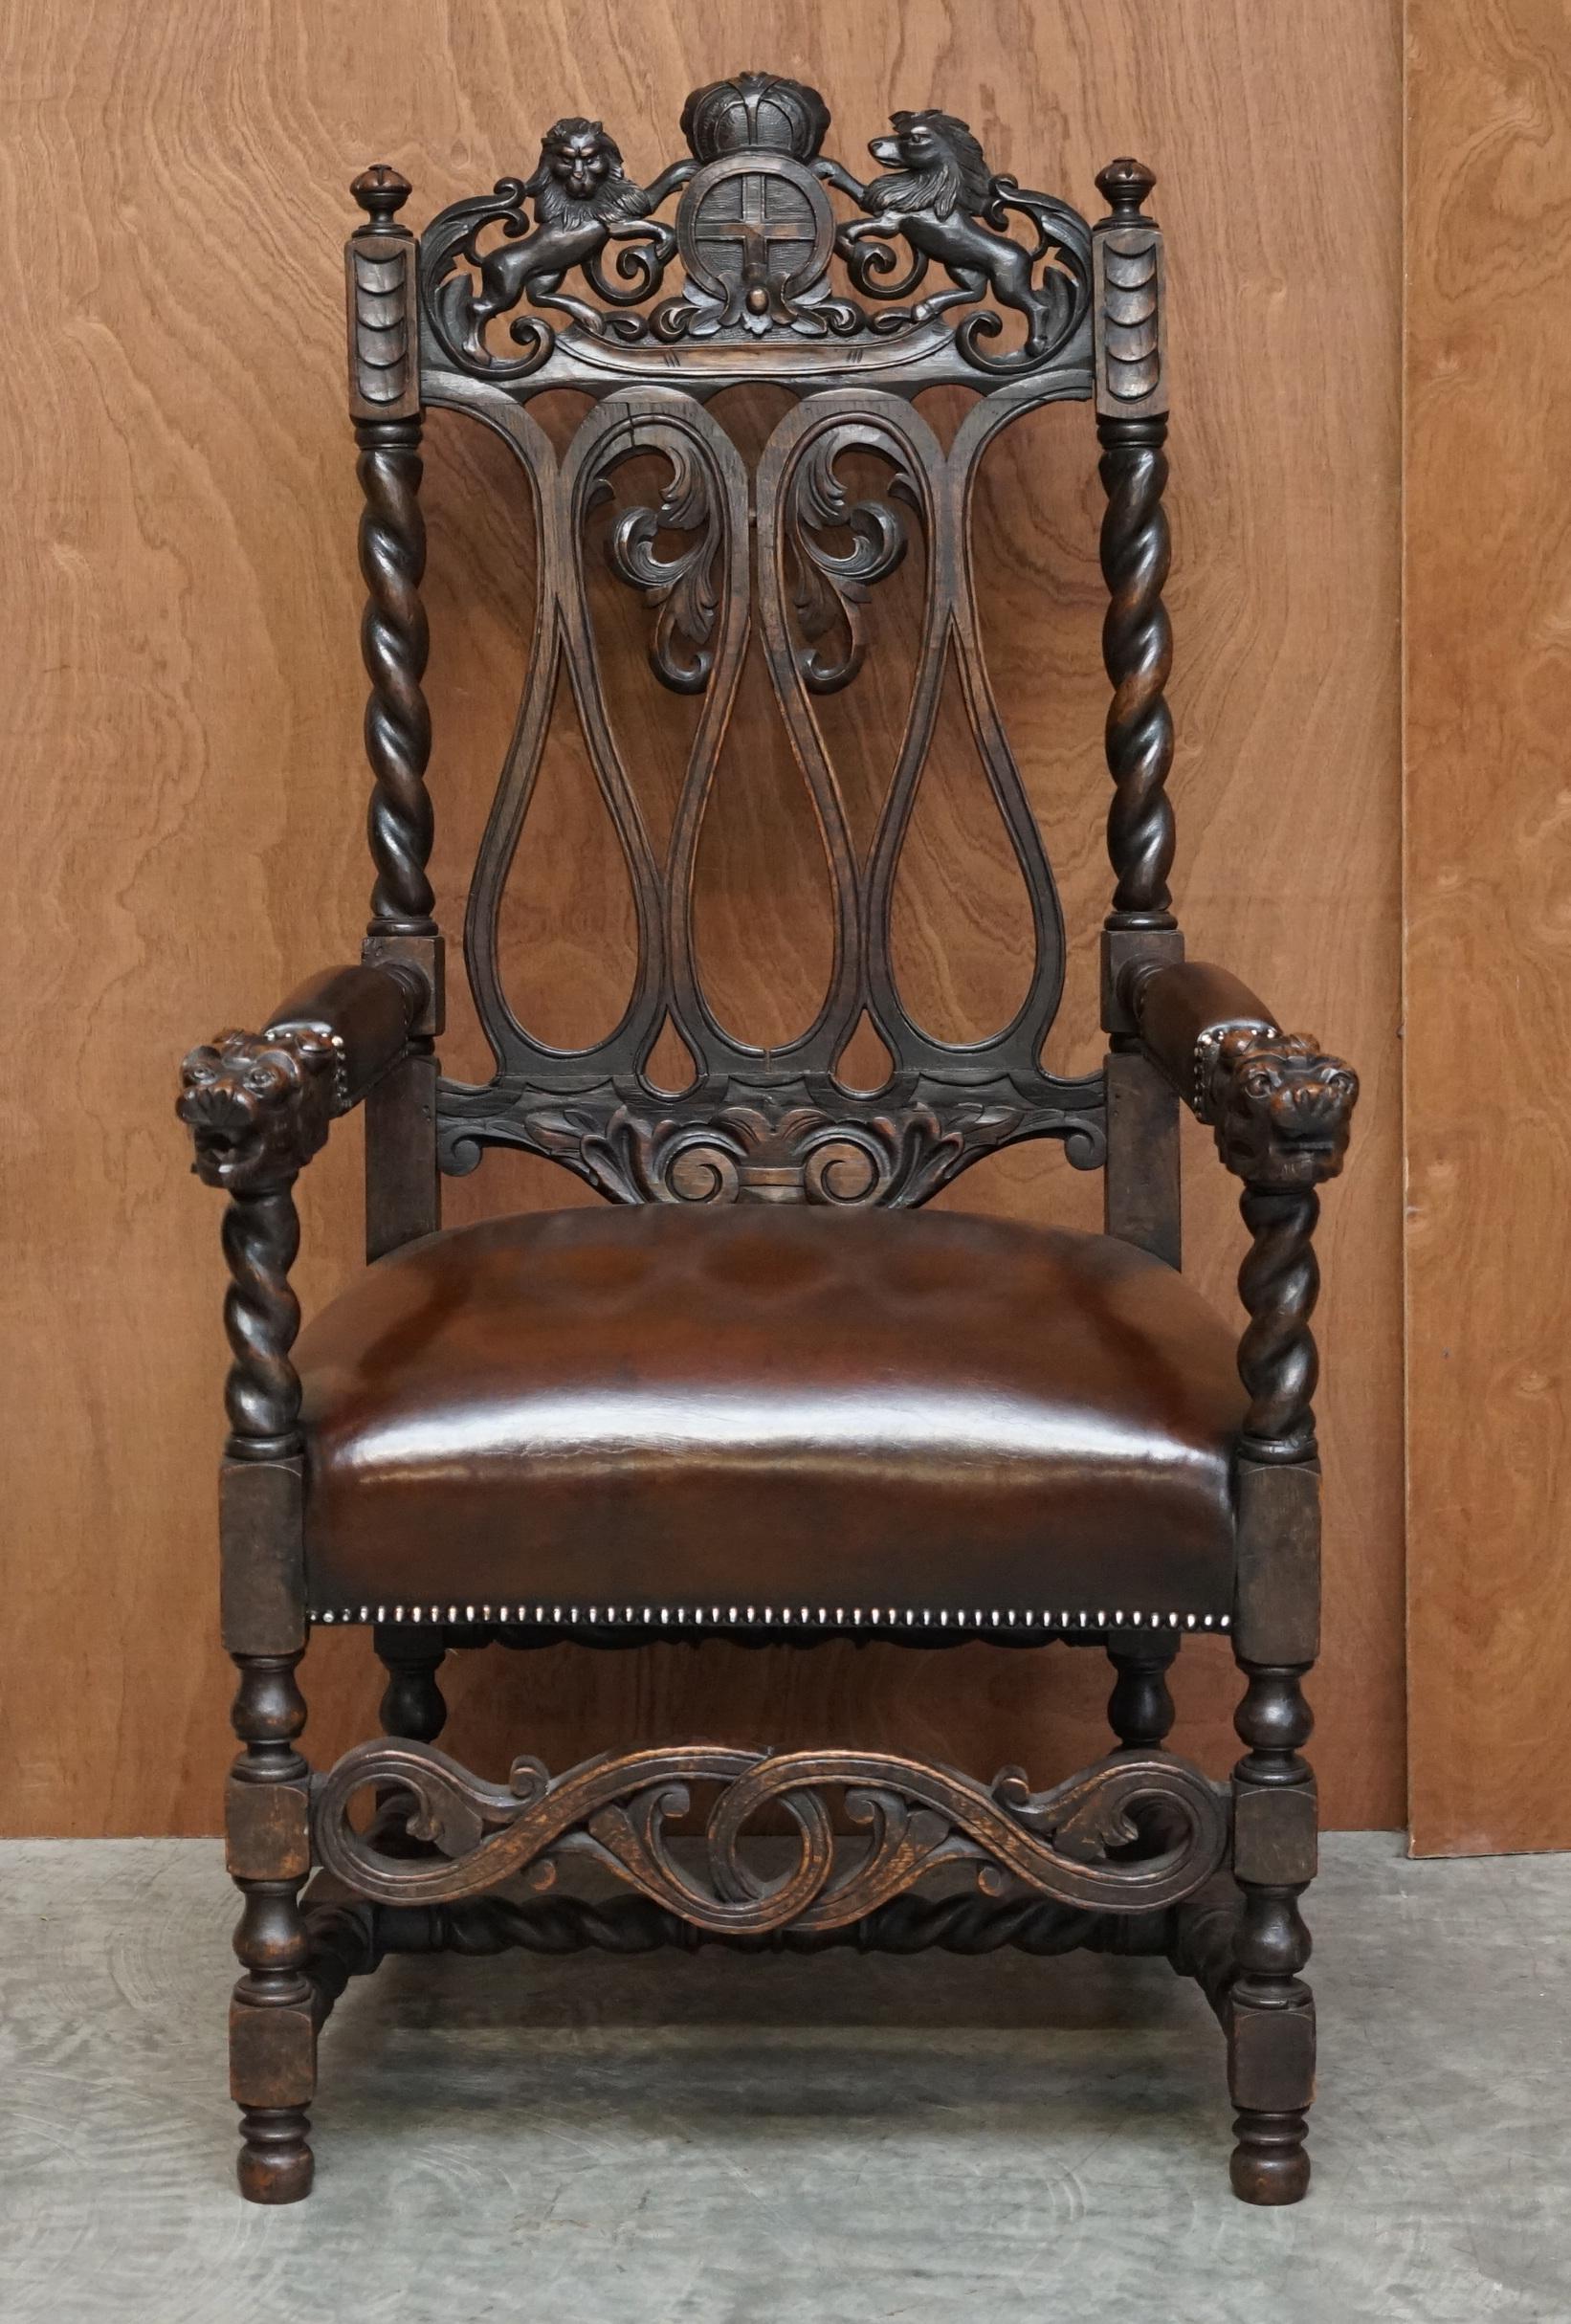 Eight Hand Carved Armorial Crest Coat of Arms Antique Jacobean Dining Chairs For Sale 7